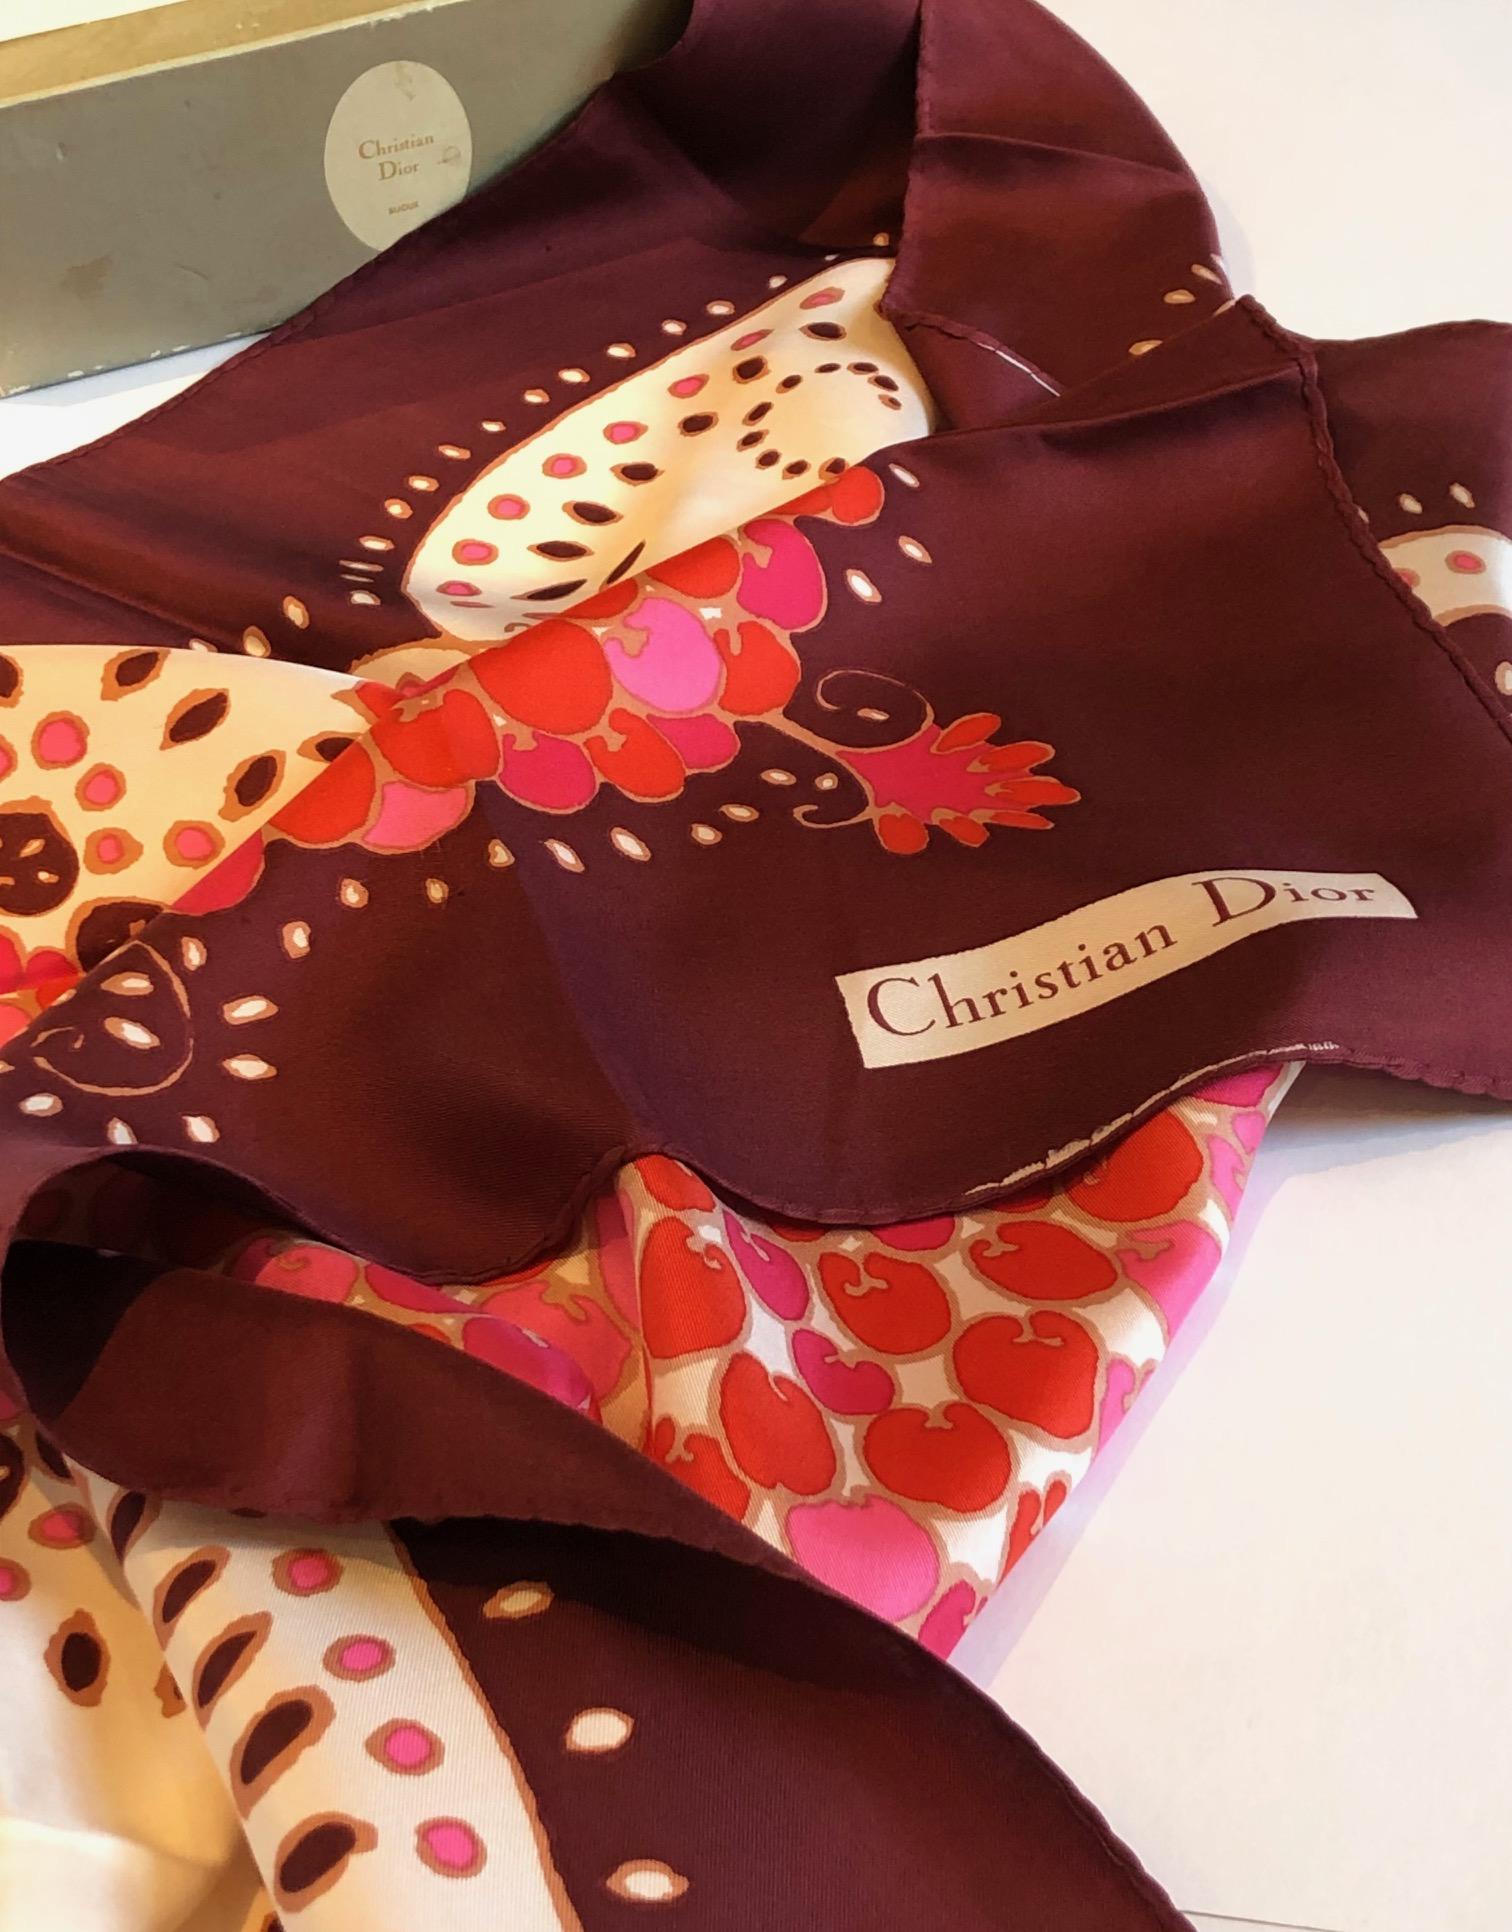 1970 CHRISTIAN DIOR Flower Multi Silk Printed Scarf 
Christian Dior beautiful silk scarf in very warm stunning colour tone, Bordeaux, red, pink, brown with off-white background and flower motifs print, 100% silk.  The CD Box in the photos is not for